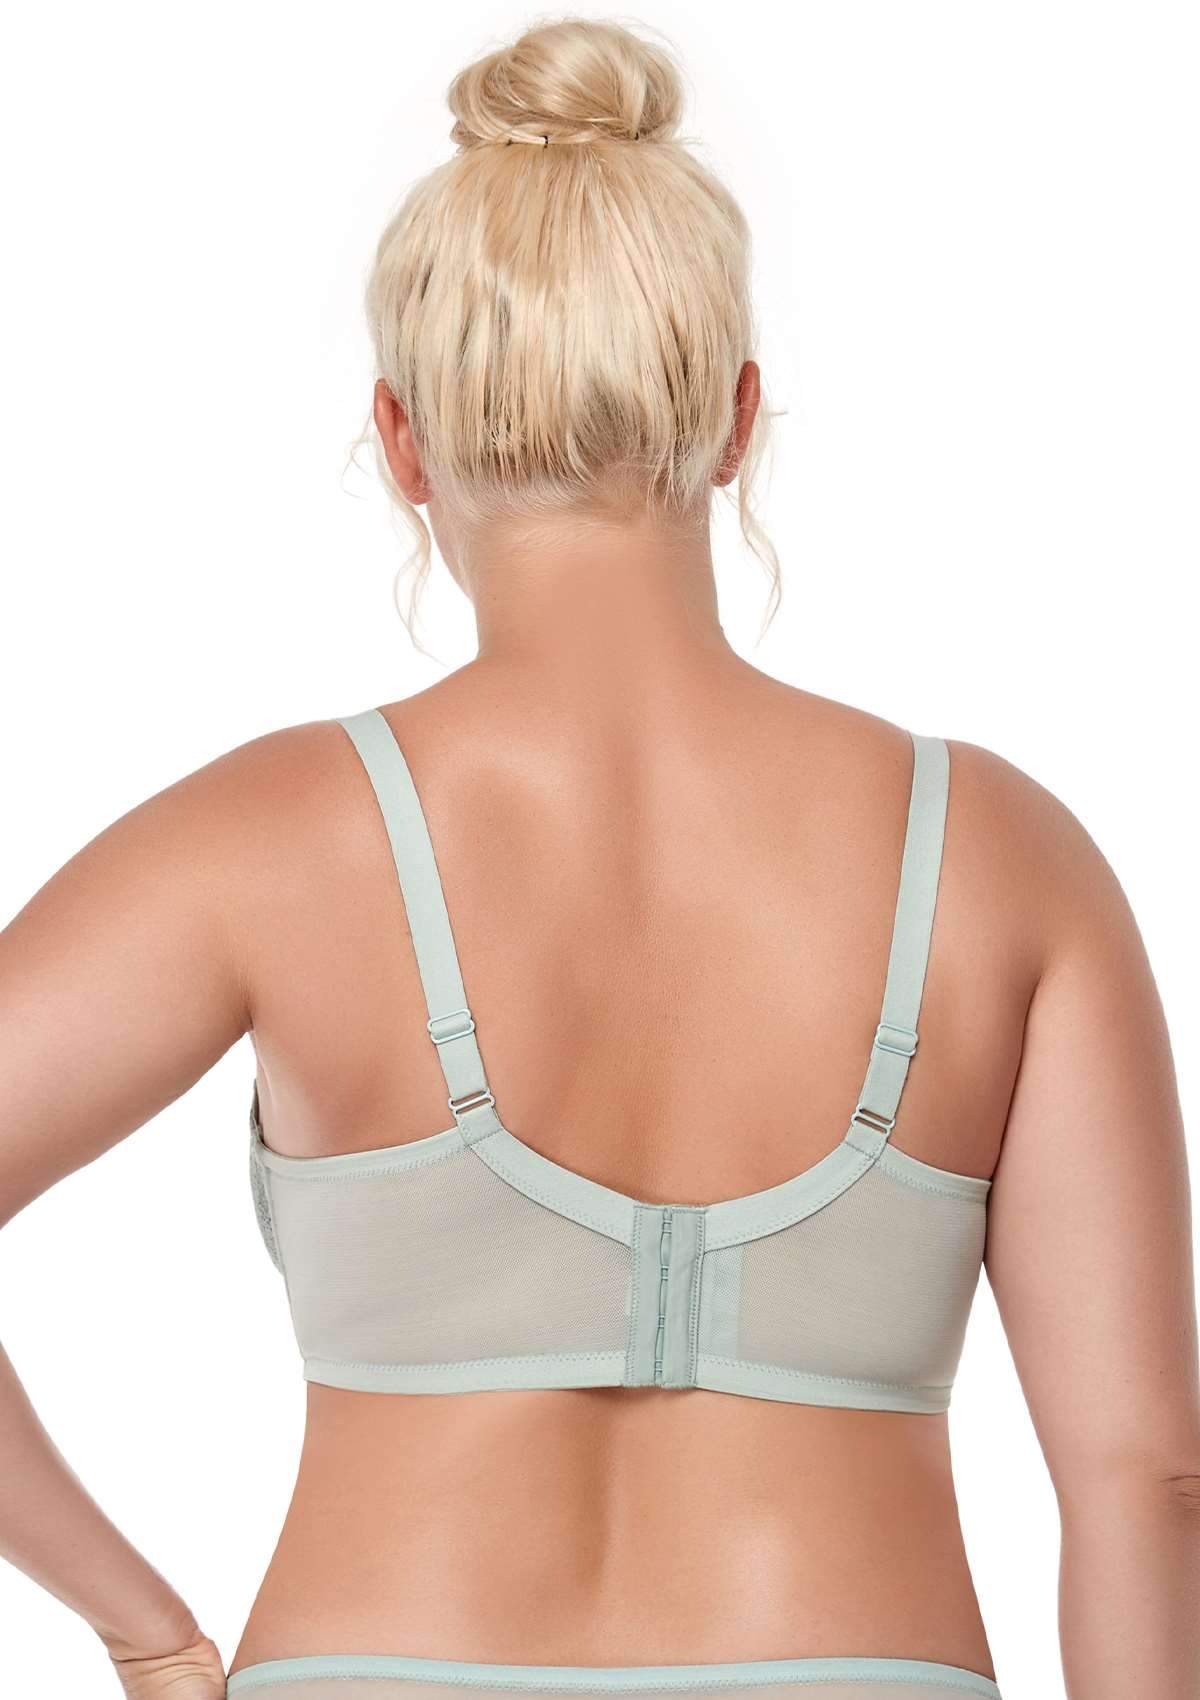 HSIA All-Over Floral Lace: Best Bra For Elderly With Sagging Breasts - Pewter Blue / 40 / DD/E